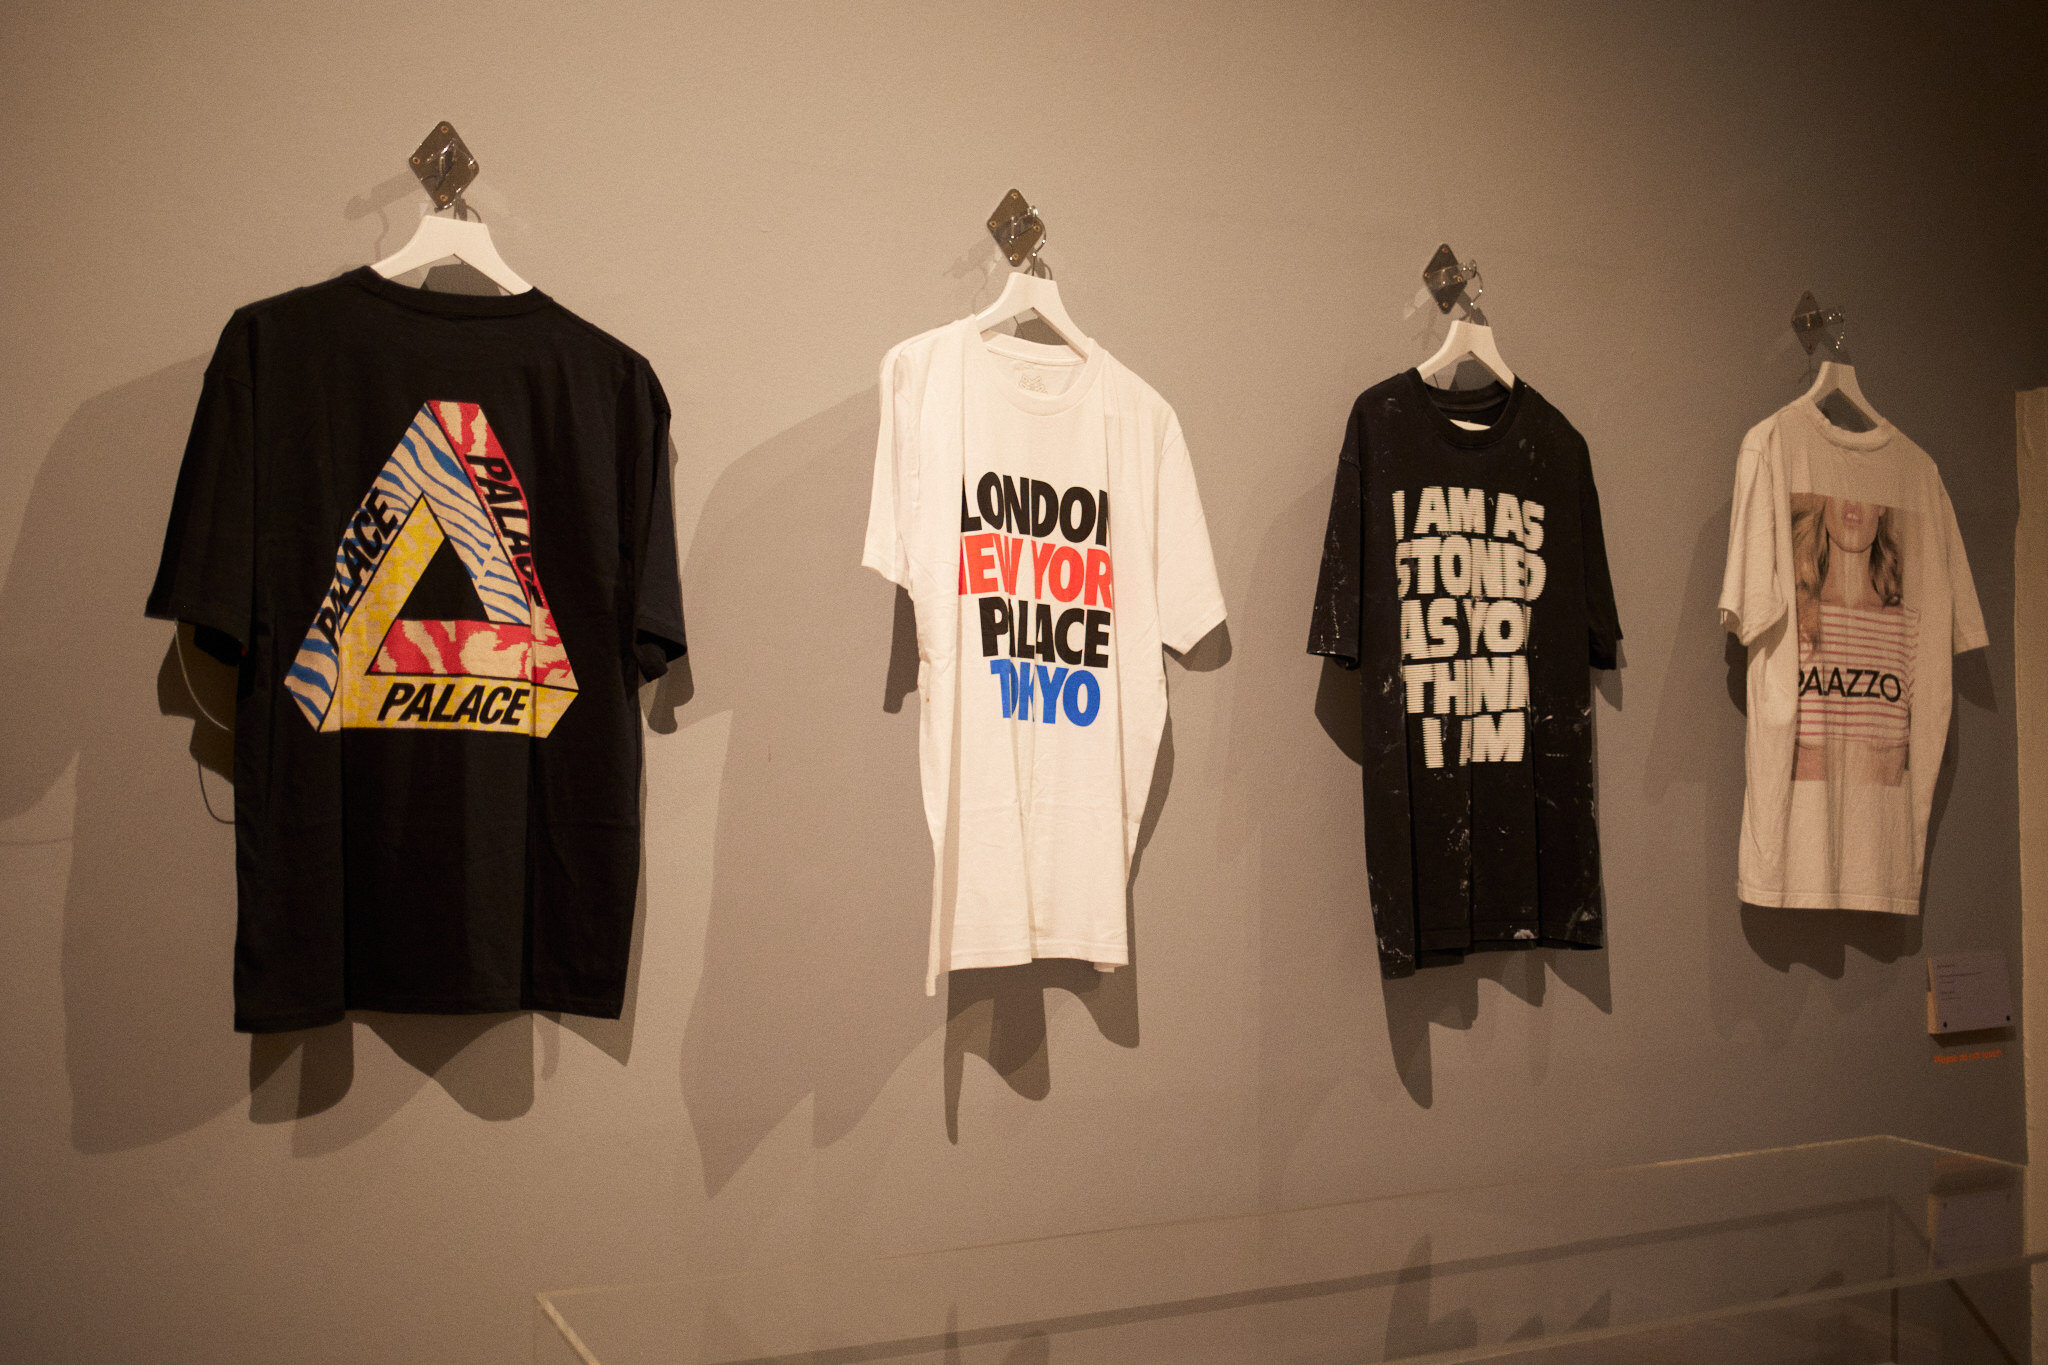 210916-No-Comply-Somerset-House-2021-London-9428-Web-Res.jpg